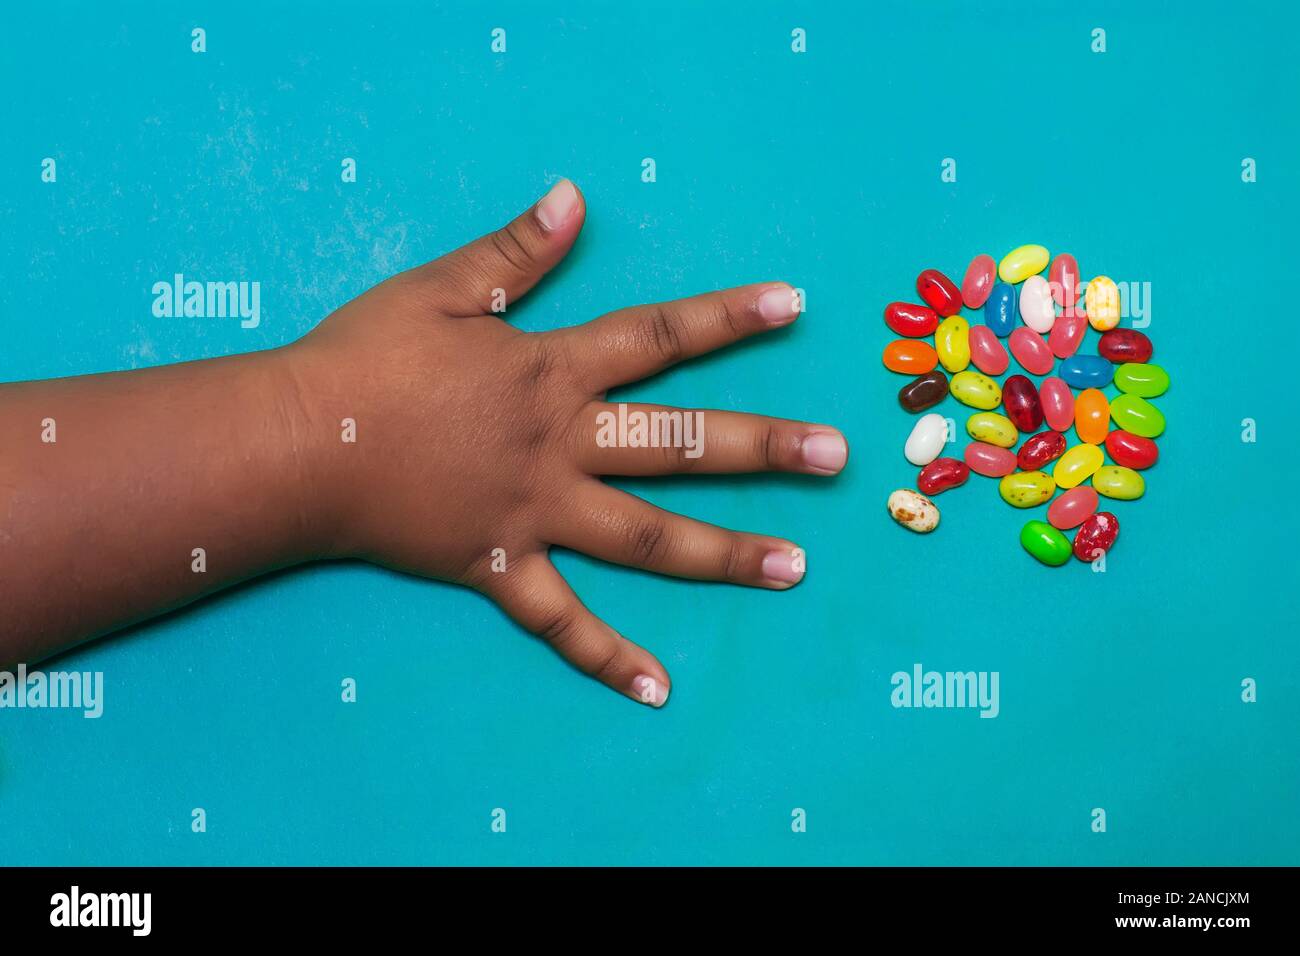 A kids arm and hand with fingers spread out that is about to grab fruit flavored candy from a small serving. Stock Photo